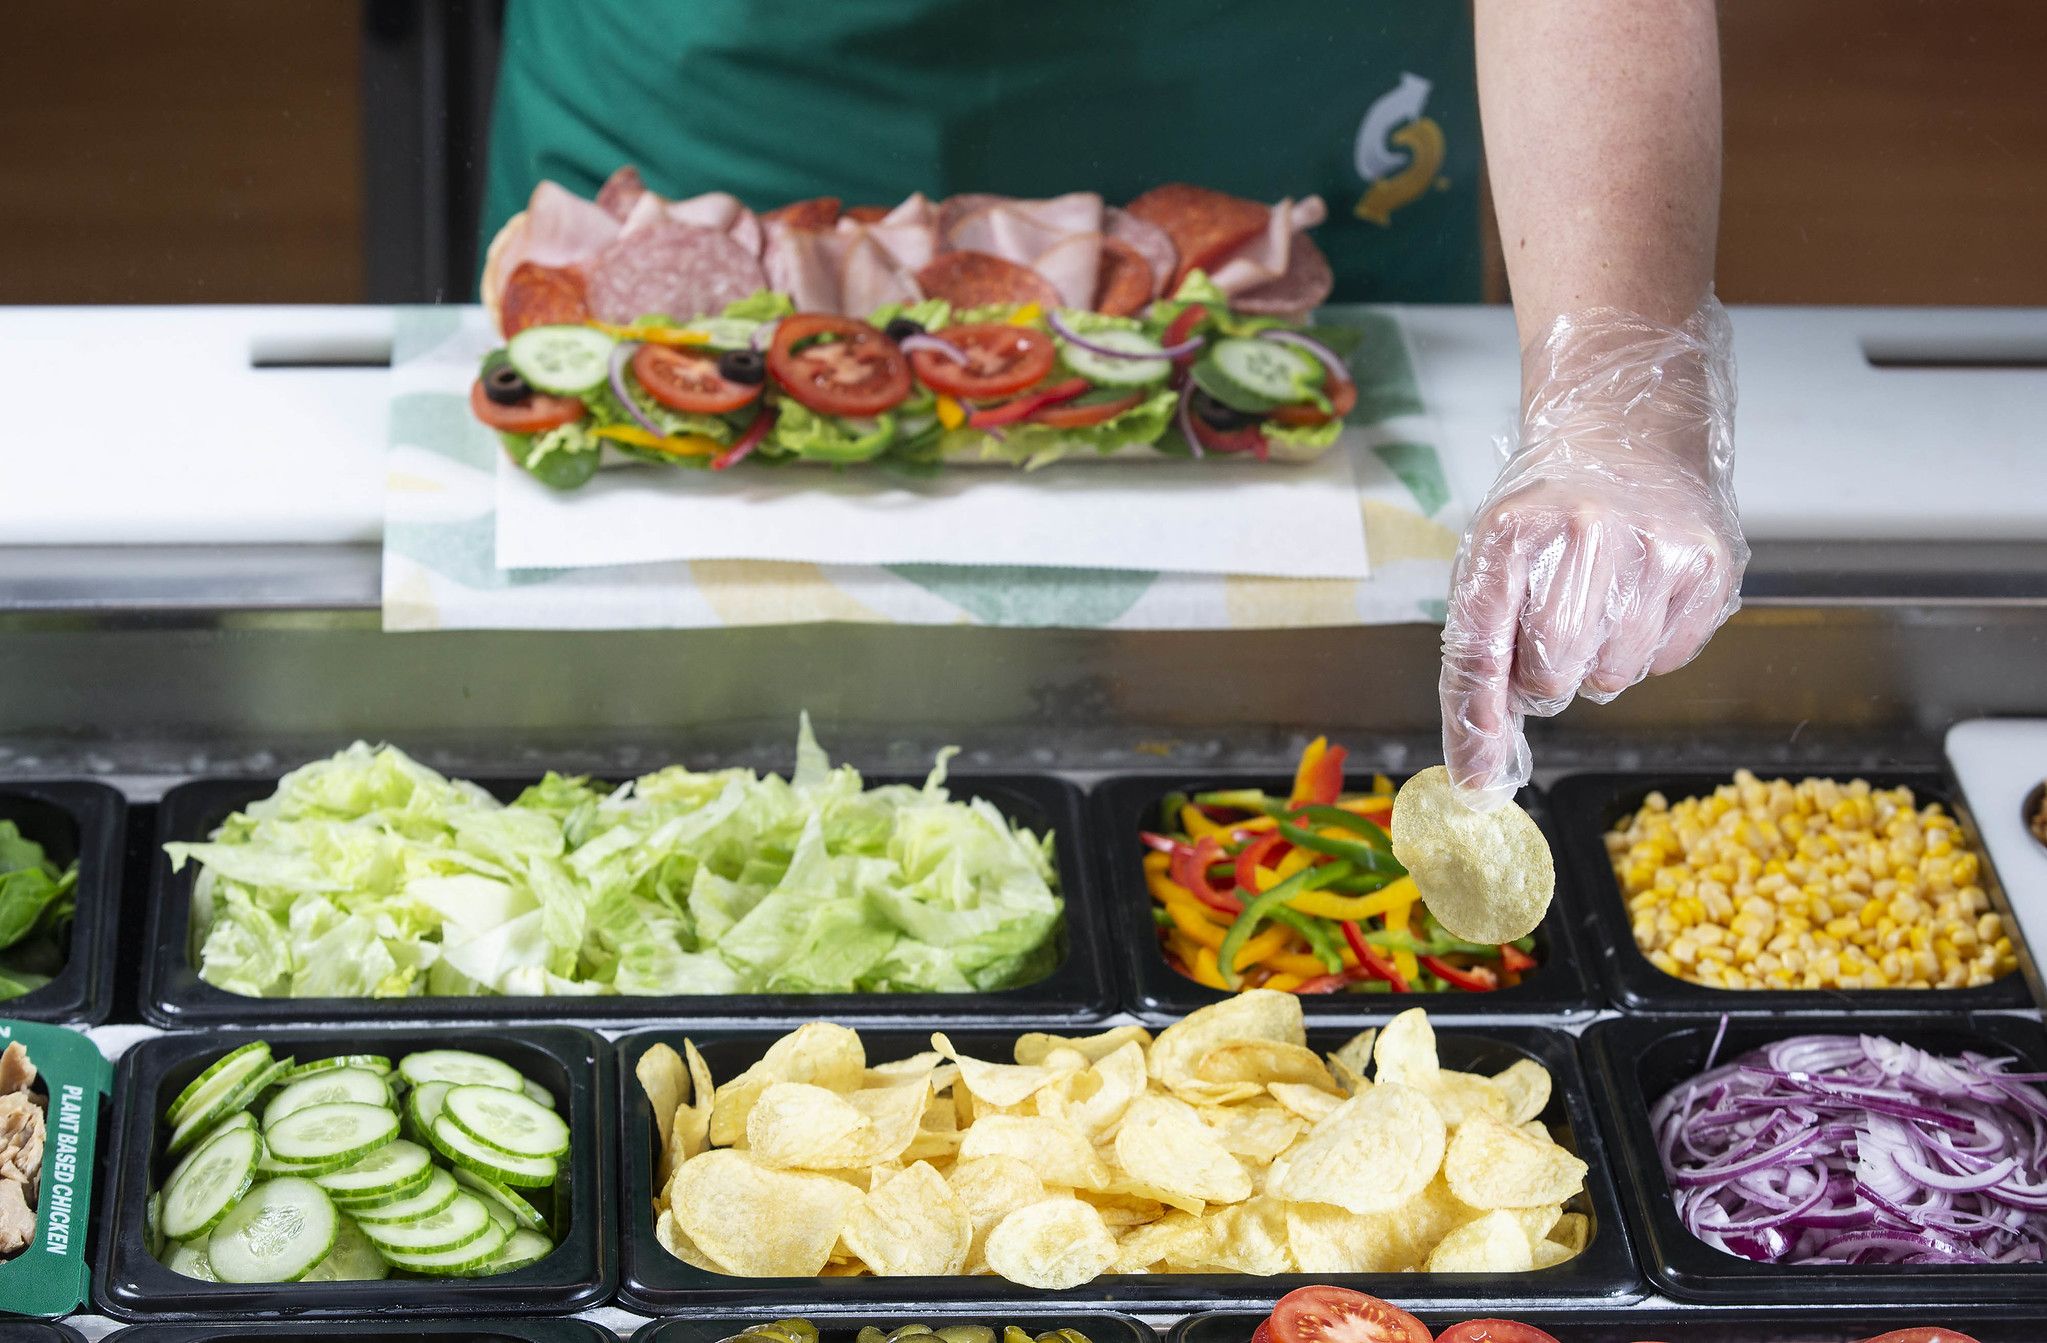 Subway Is Offering Walkers Crisps As Topping Option